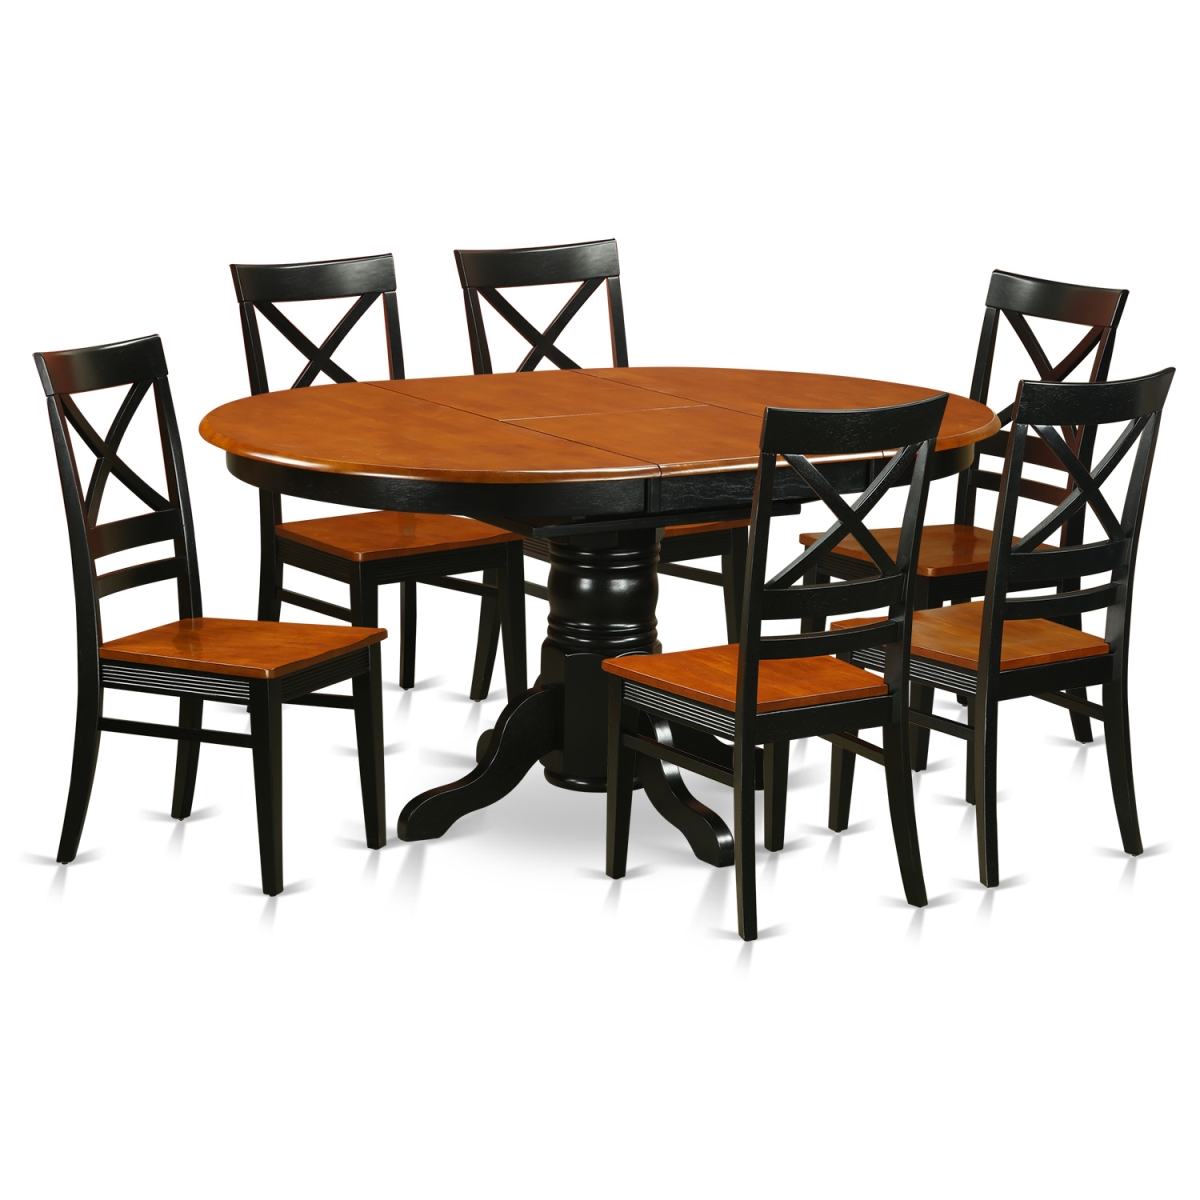 Picture of East West Furniture AVQU7-BCH-W Wood Seat Dining Set with 6 Wooden Chairs, Black & Cherry - 7 Piece